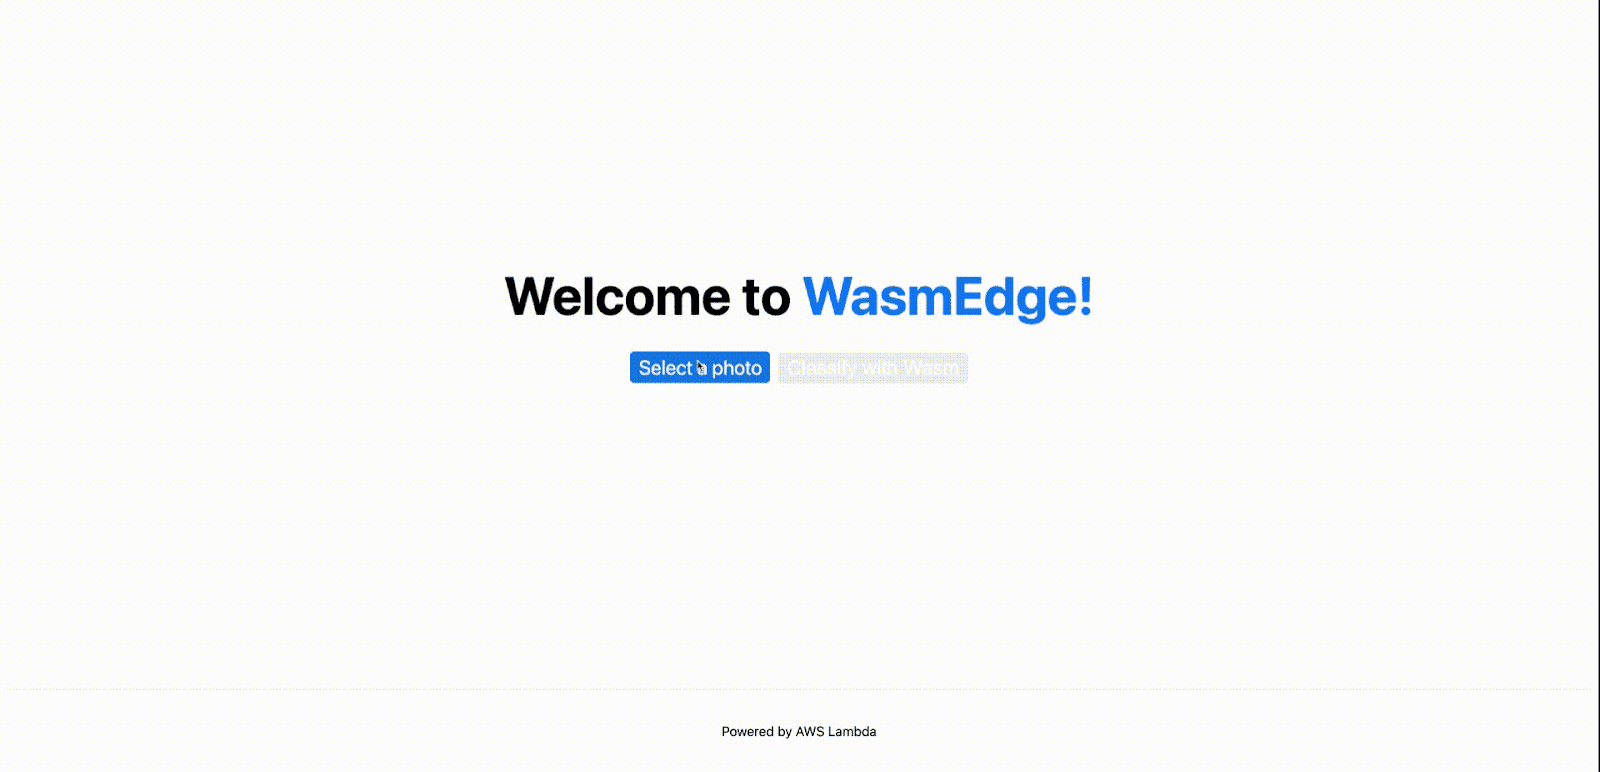 Screenshot of WasmEdge application welcome page with an arrow pointing "select a photo" option